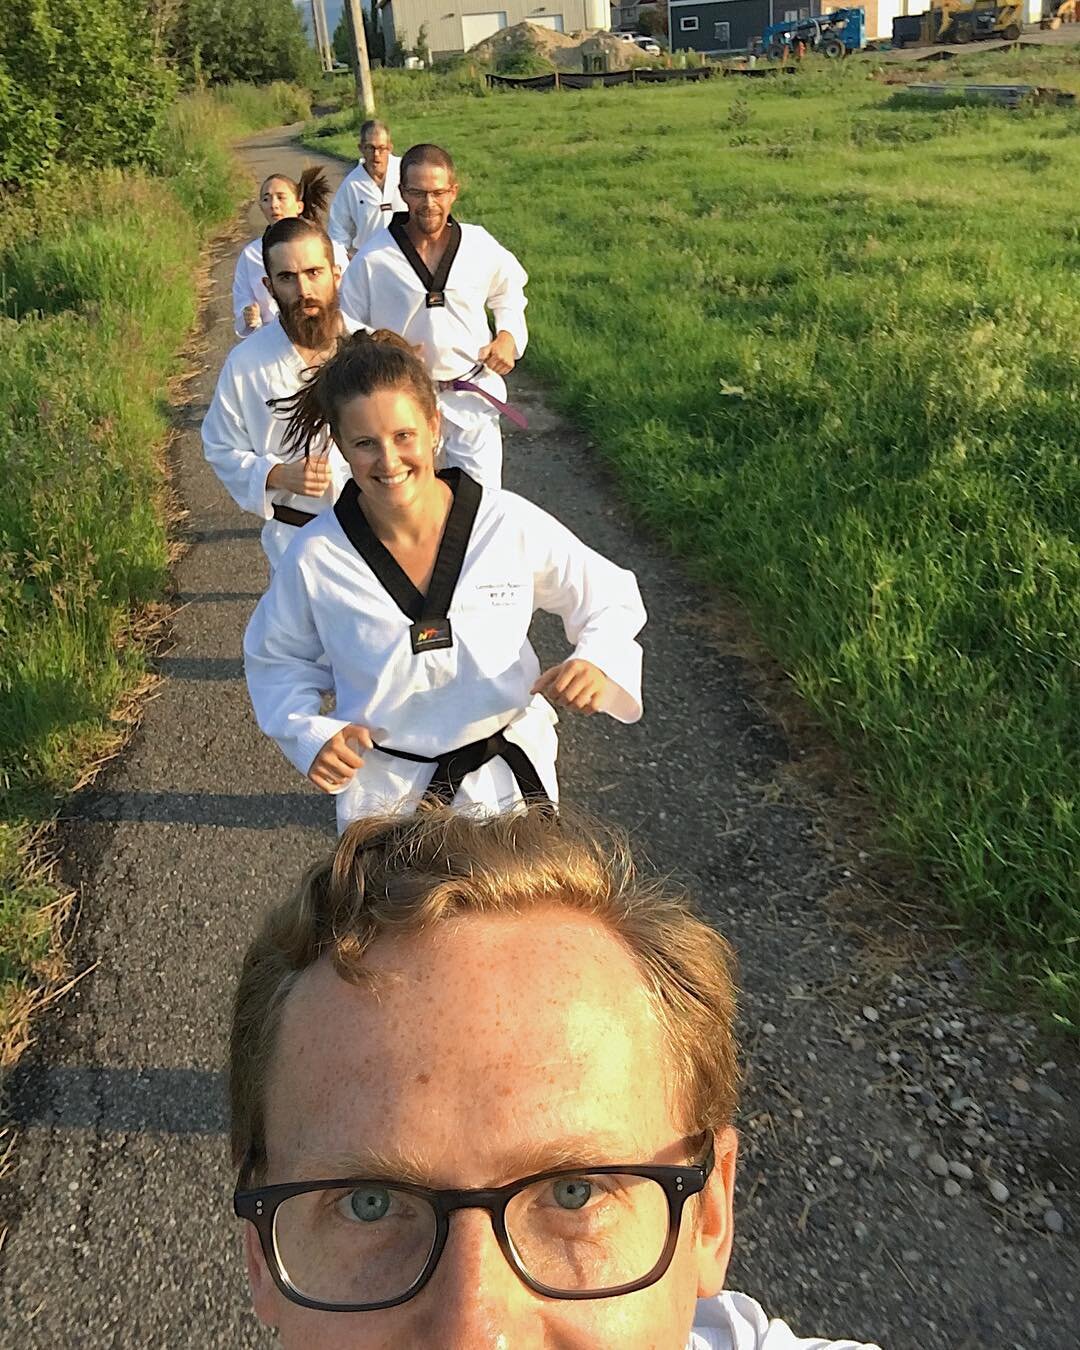 Getting familiar with our new gym location, and enjoying what&rsquo;s left of summer with an evening run! #latergram #bozemantkd #bozemantaekwondoacademy #taekwondo #bozeman #bozemansummer #outsidebozeman